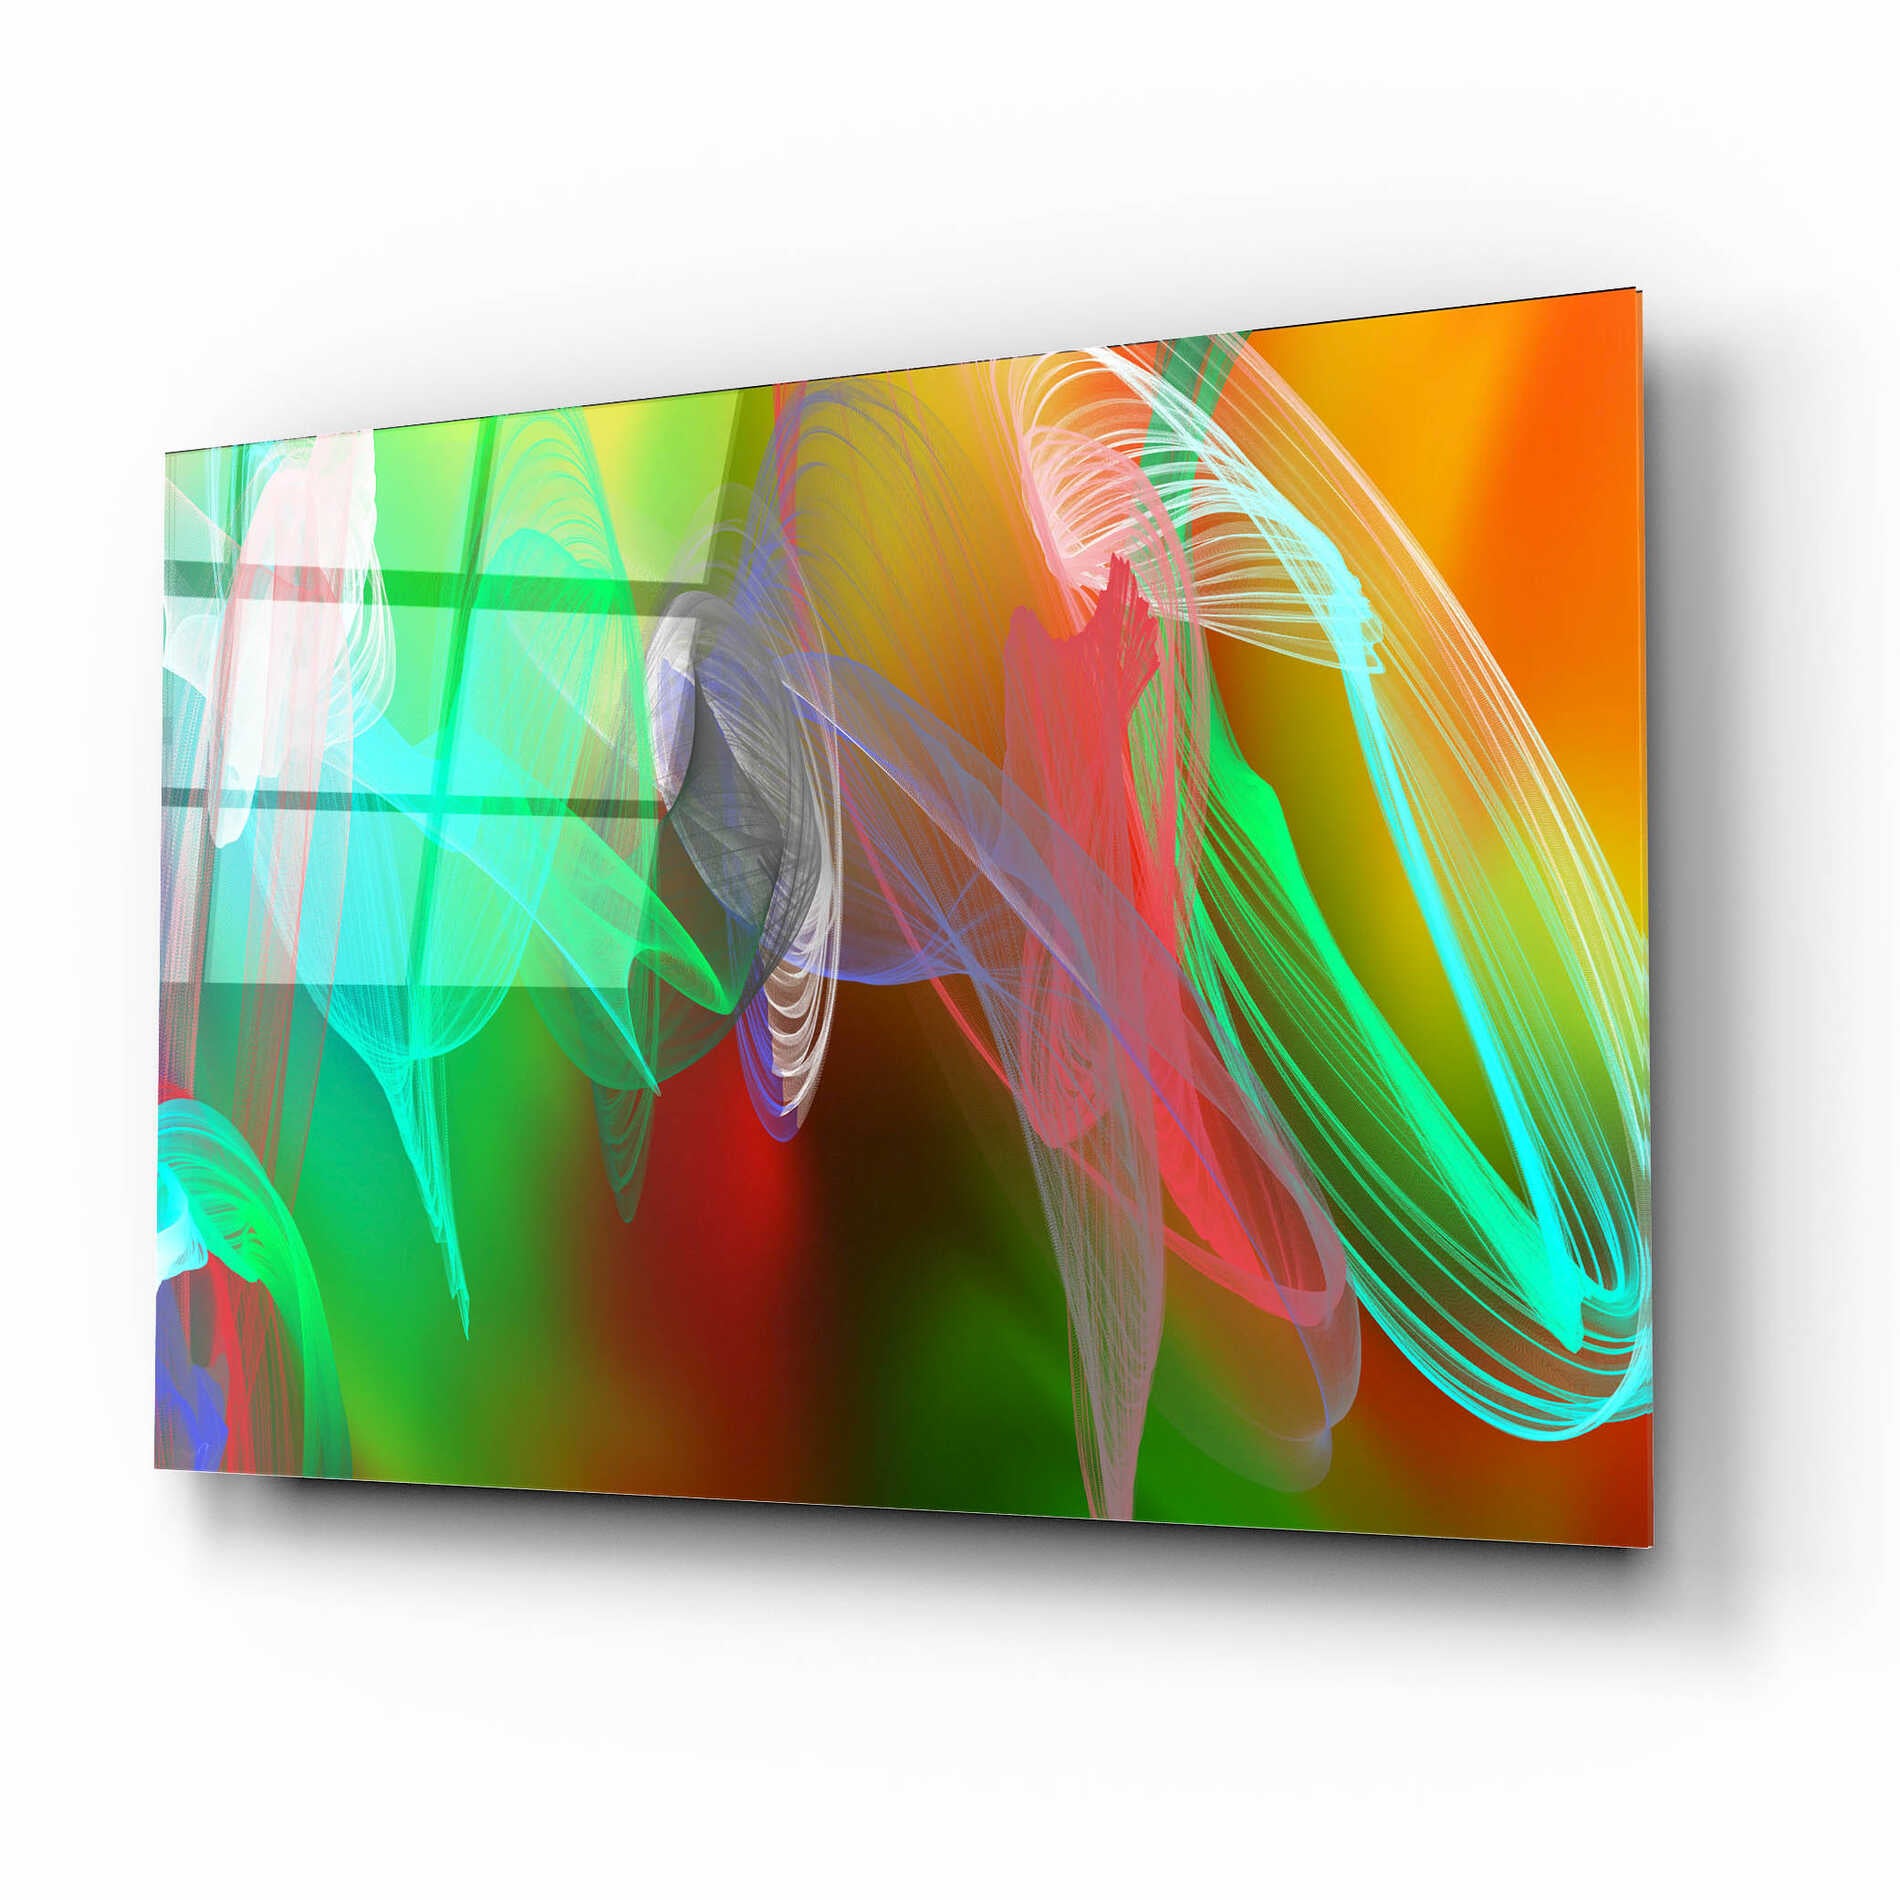 Epic Art 'Inverted Color In The Lines 7' by Irena Orlov Acrylic Glass Wall Art,16x12